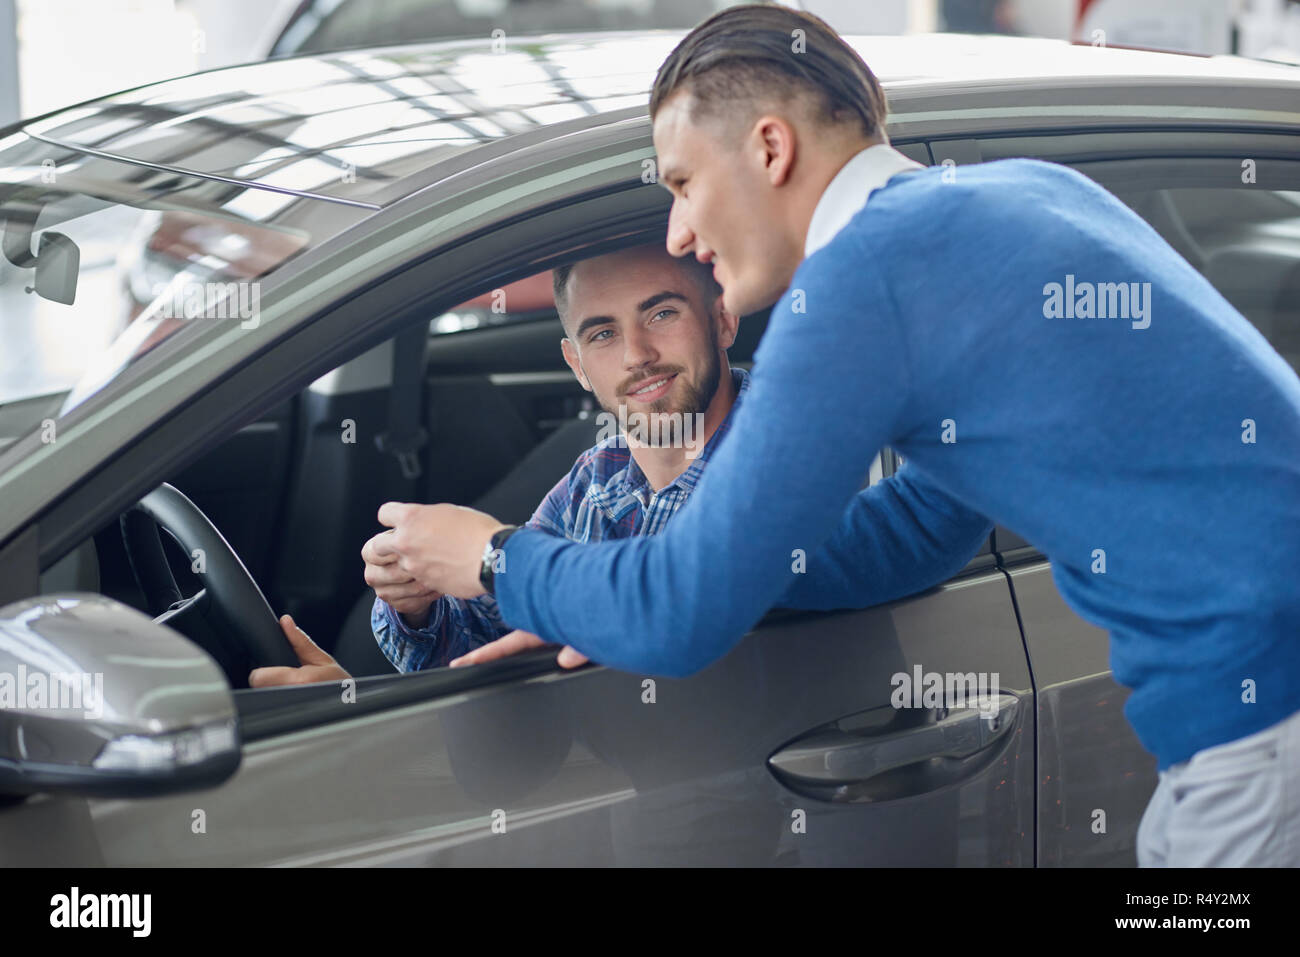 Brunette client with beard sitting in grey car and holding his hand on steering wheel. Menager in blue sweater leaning on front door and talking with customer. Man helping his friend choosing vehicle. Stock Photo